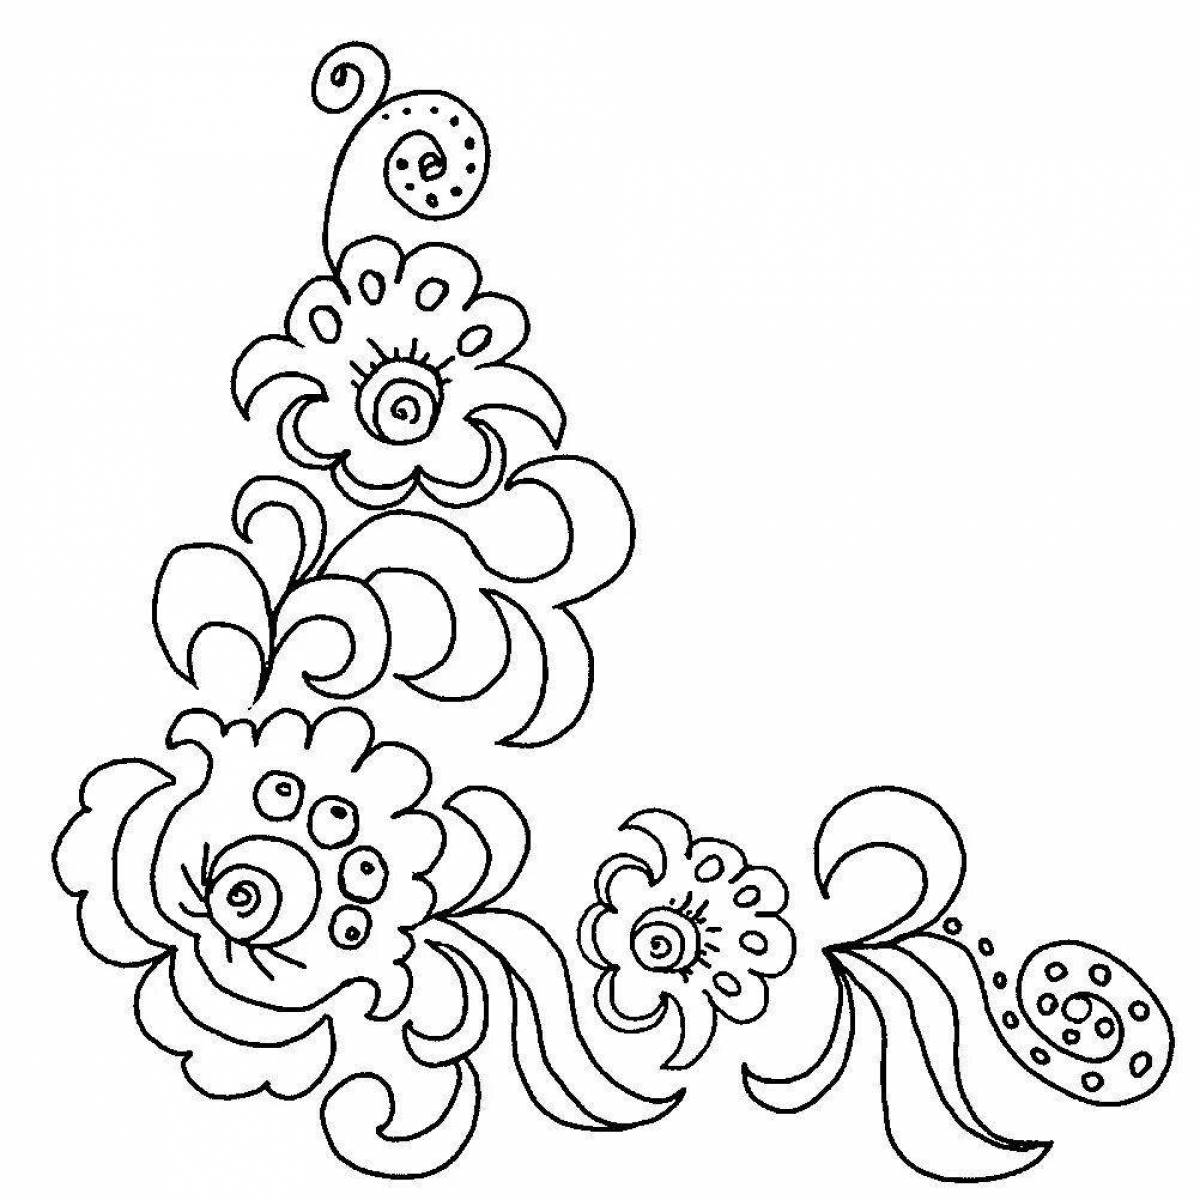 Intricate Russian coloring page